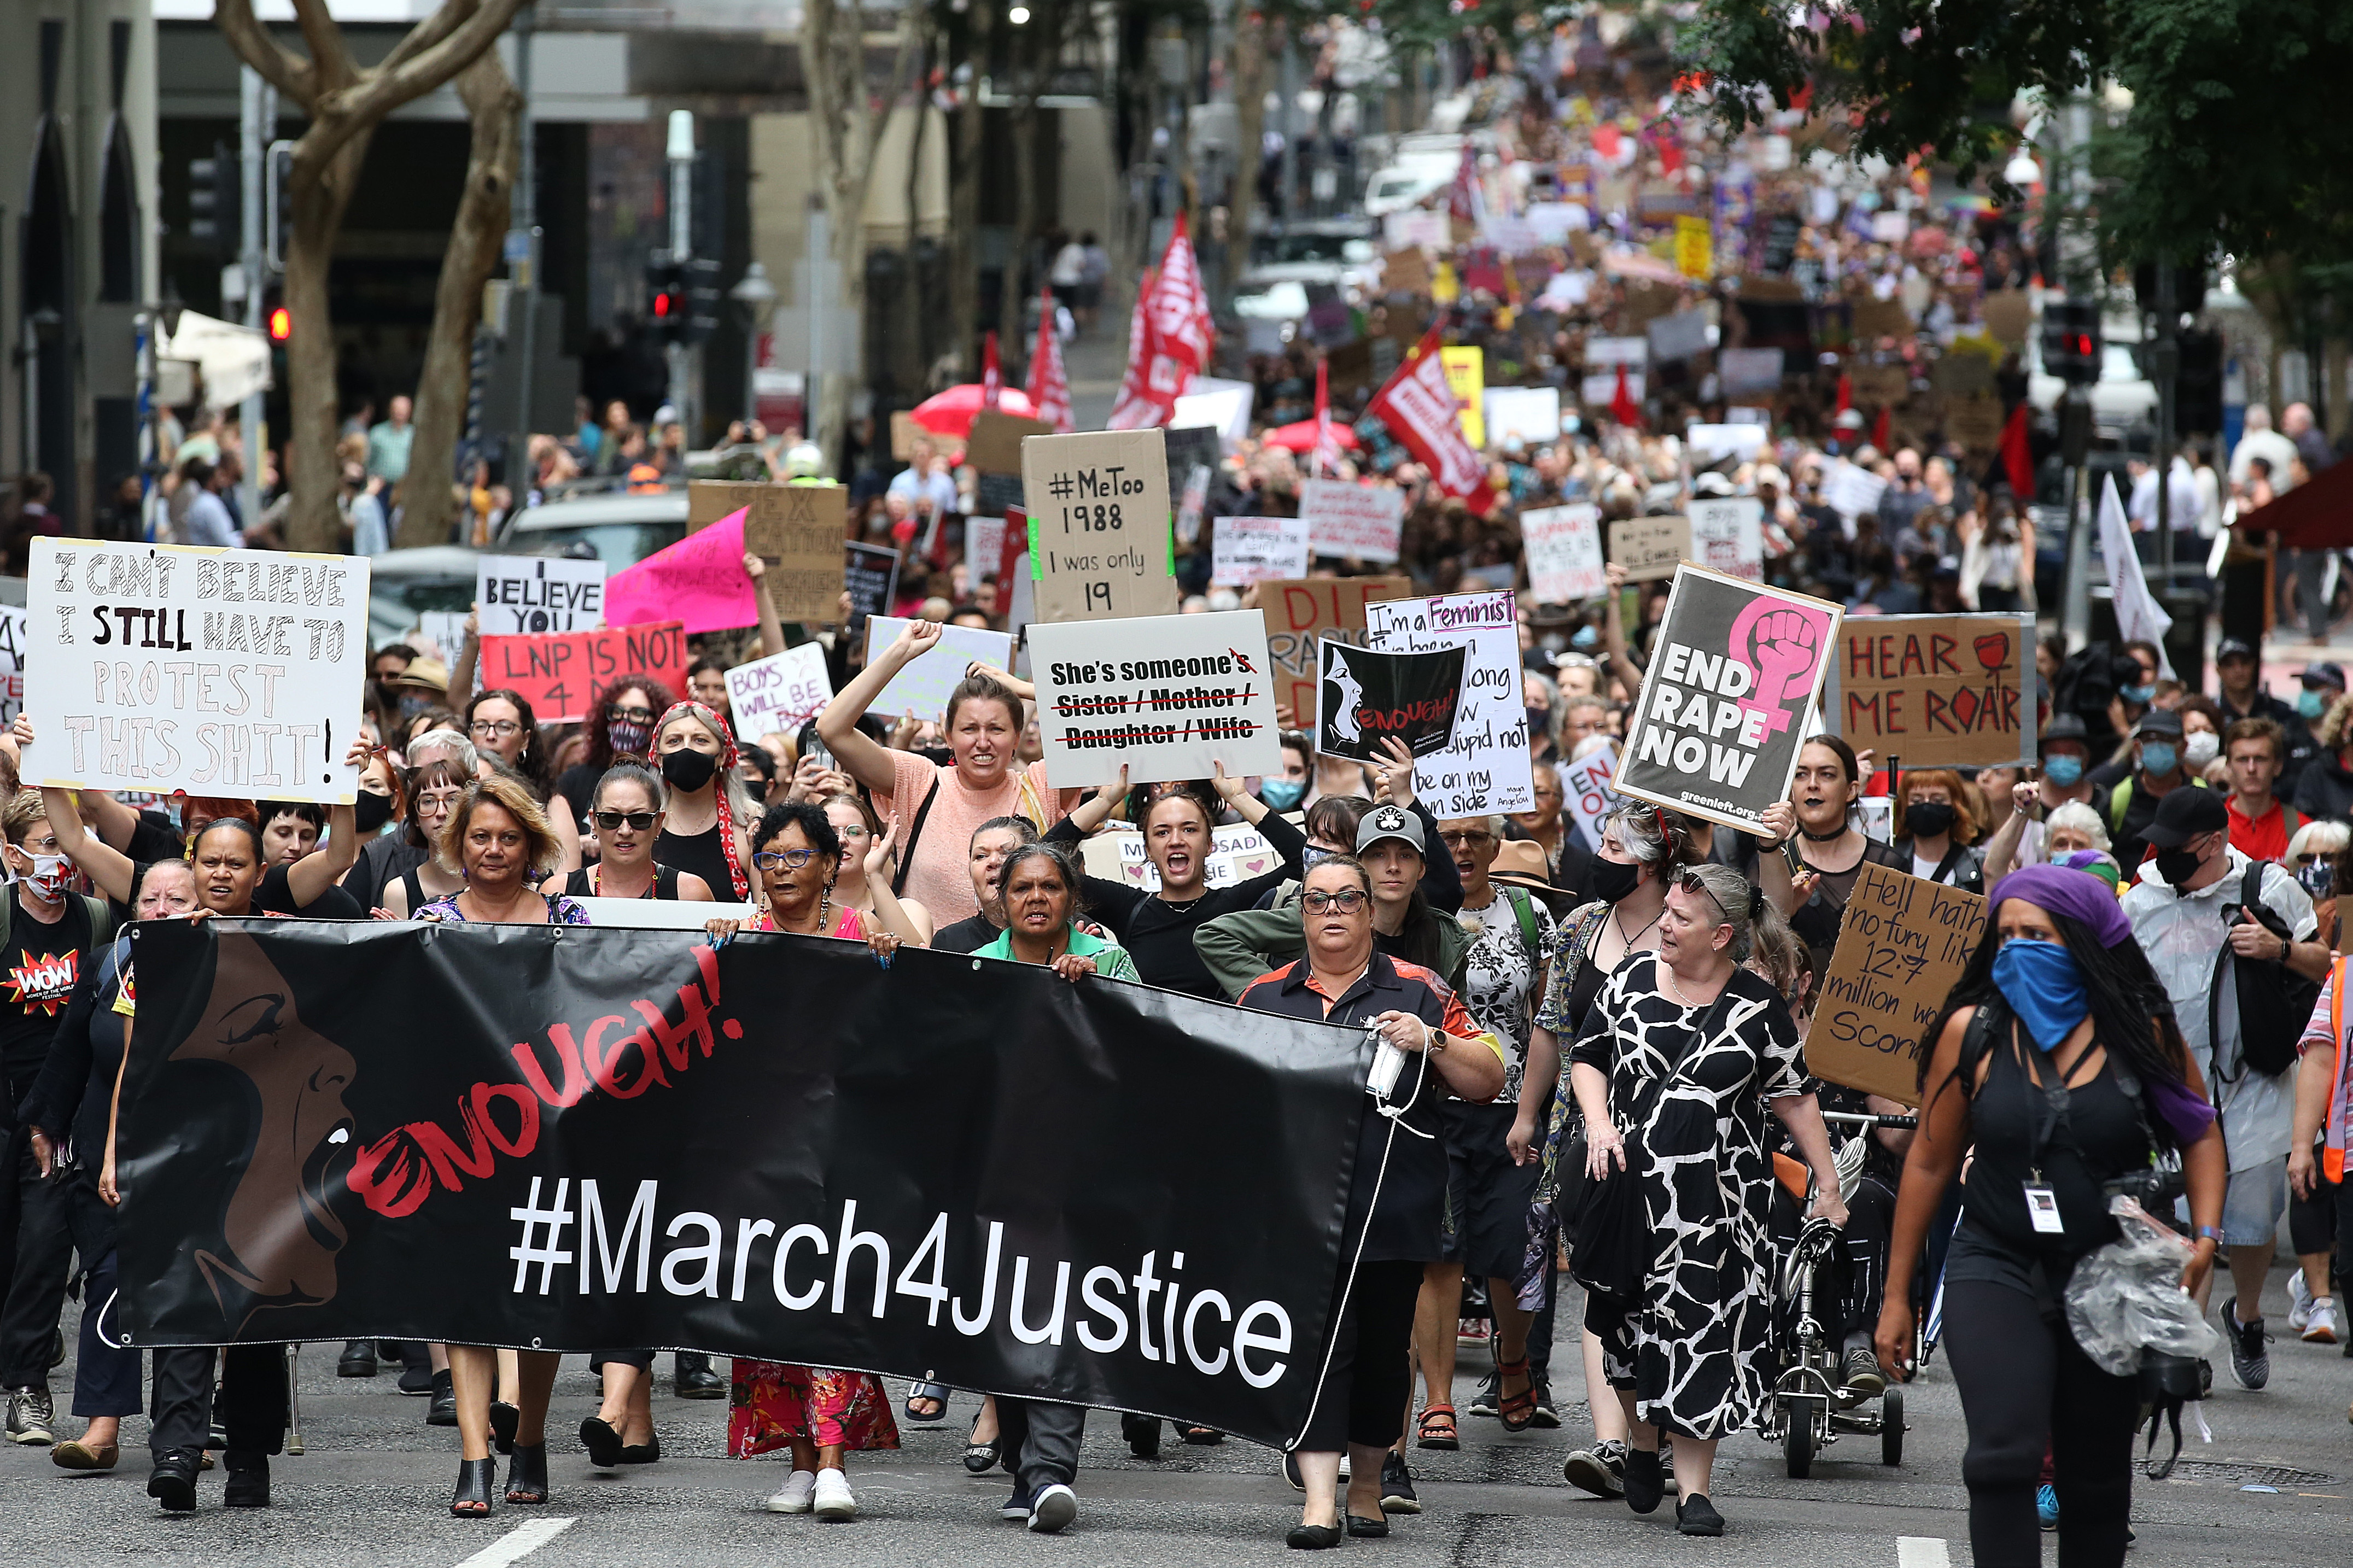 Thousands of protesters joined the "March 4 Justice" rallies across Australia to call for action against gender-based violence after rape allegations involving members of parliament. 